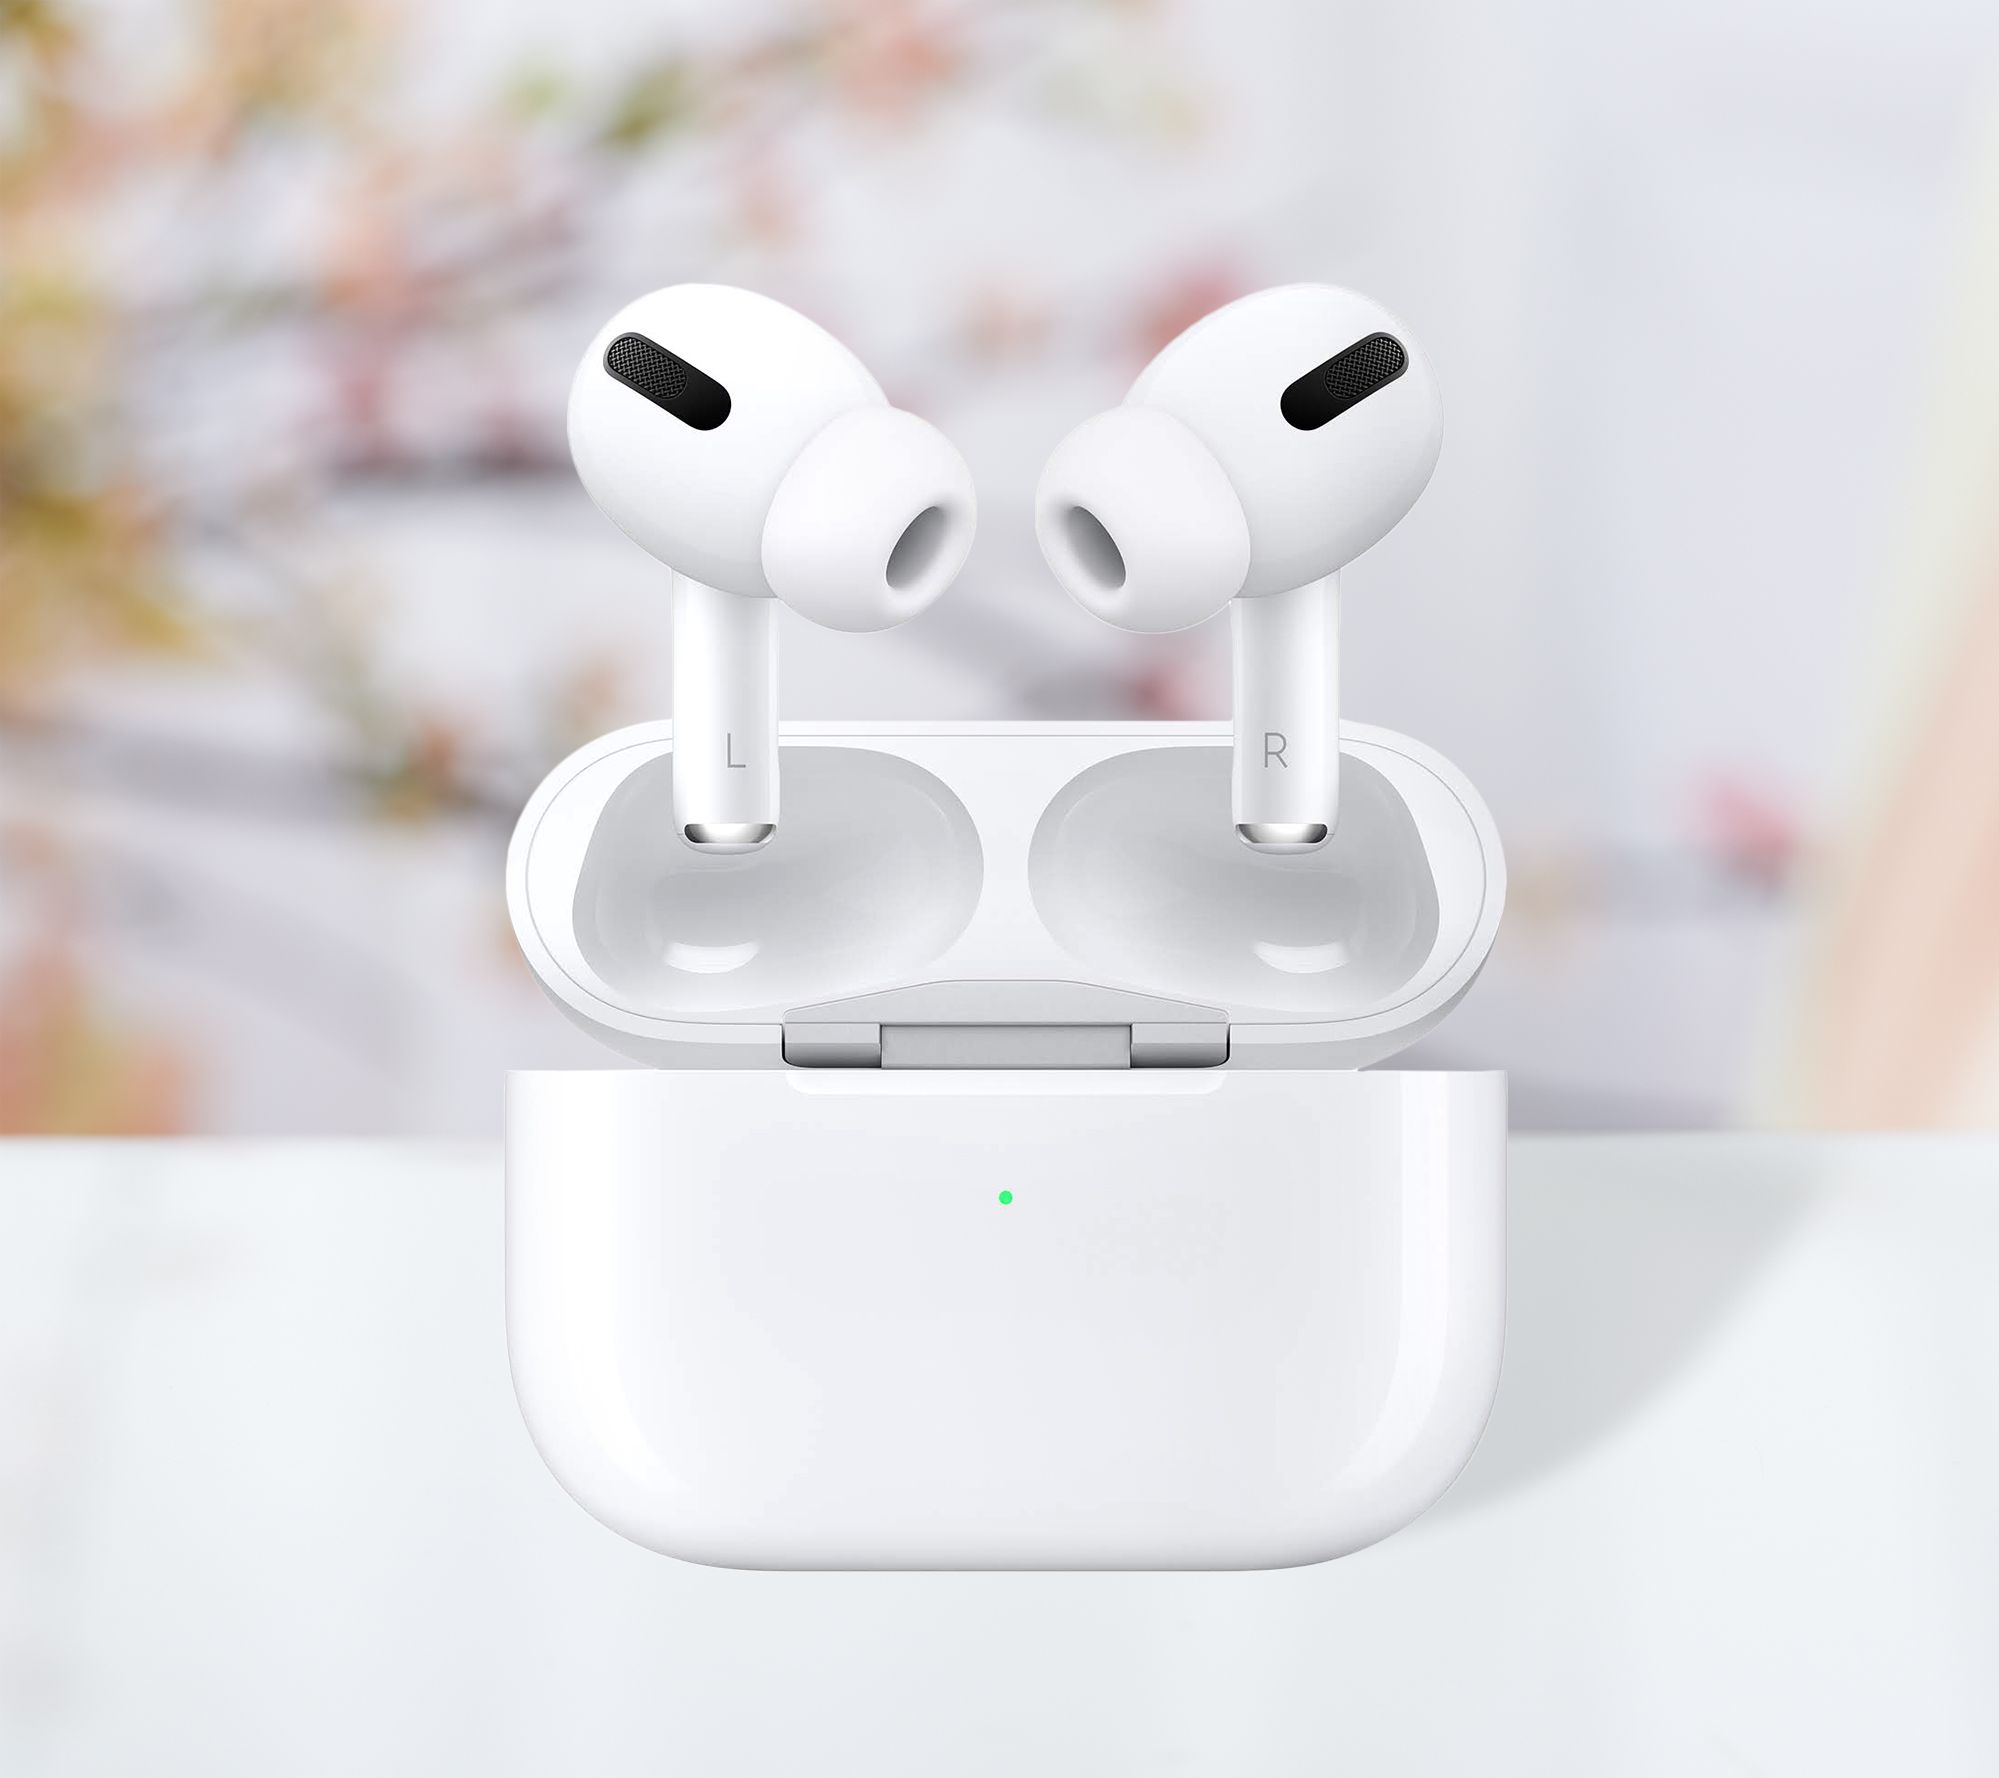 Apple AirPods Pro Headphones with Accessory Bundle and Voucher 